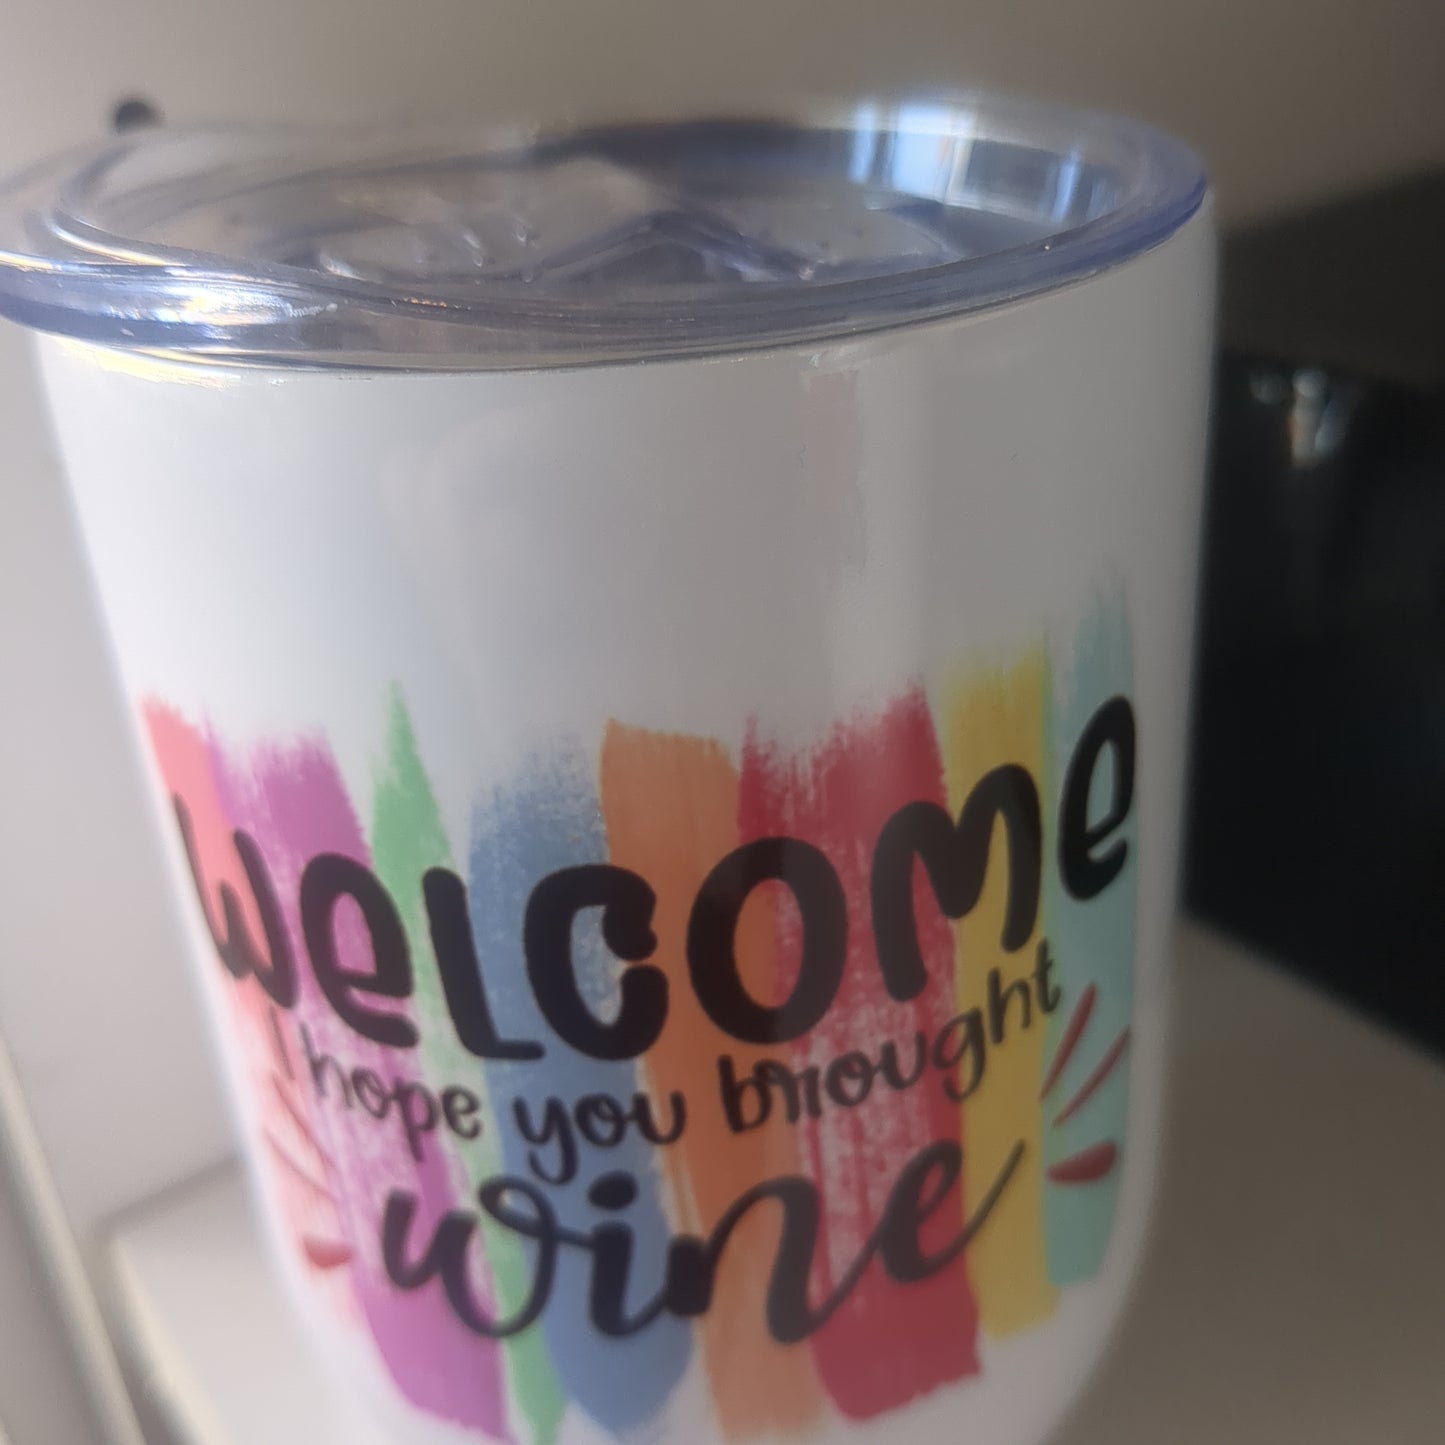 12 Oz Insulated Stainless Steel Wine Glass Says Welcome I Hope You Brought Wine